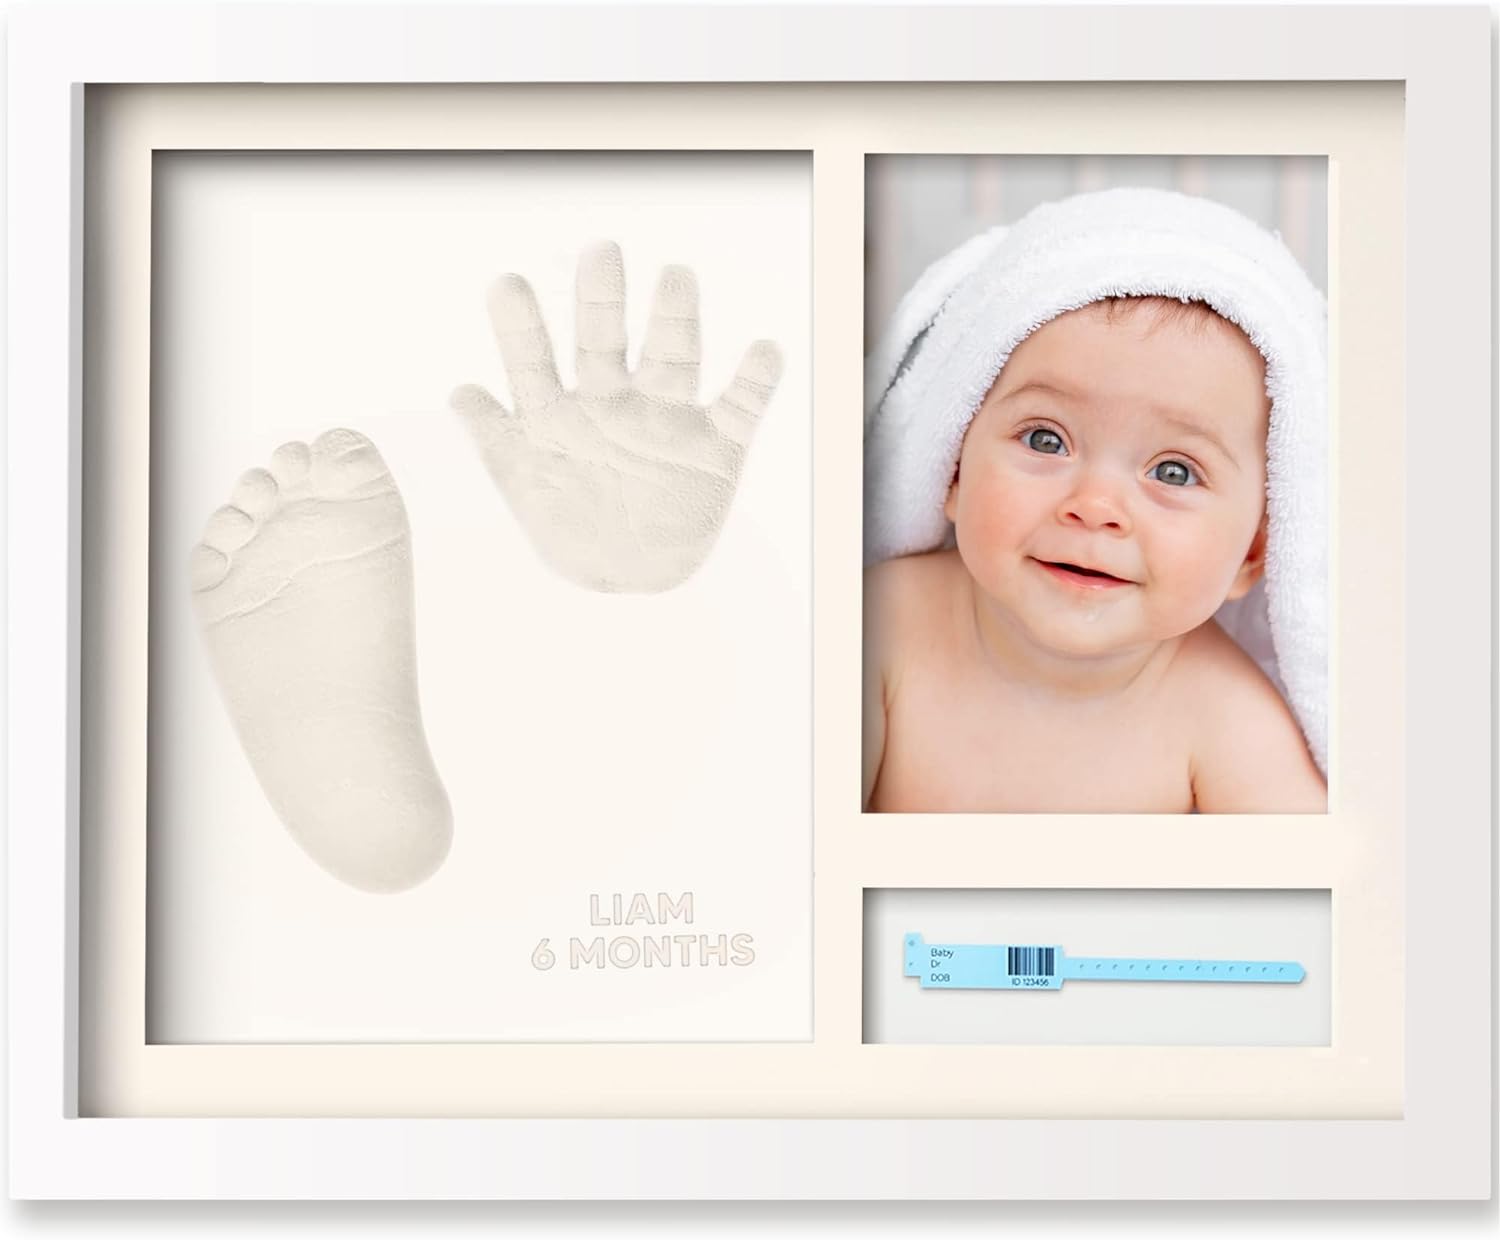 Baby Hand and Footprint Kit - Personalized Baby Footprint Kit & Handprint Kit - Baby Gift for Newborn, Boy, Girl - Baby Photo Frame Print Kit - Baby Shower Gifts - Keepsake Baby Gifts (Alpine White)